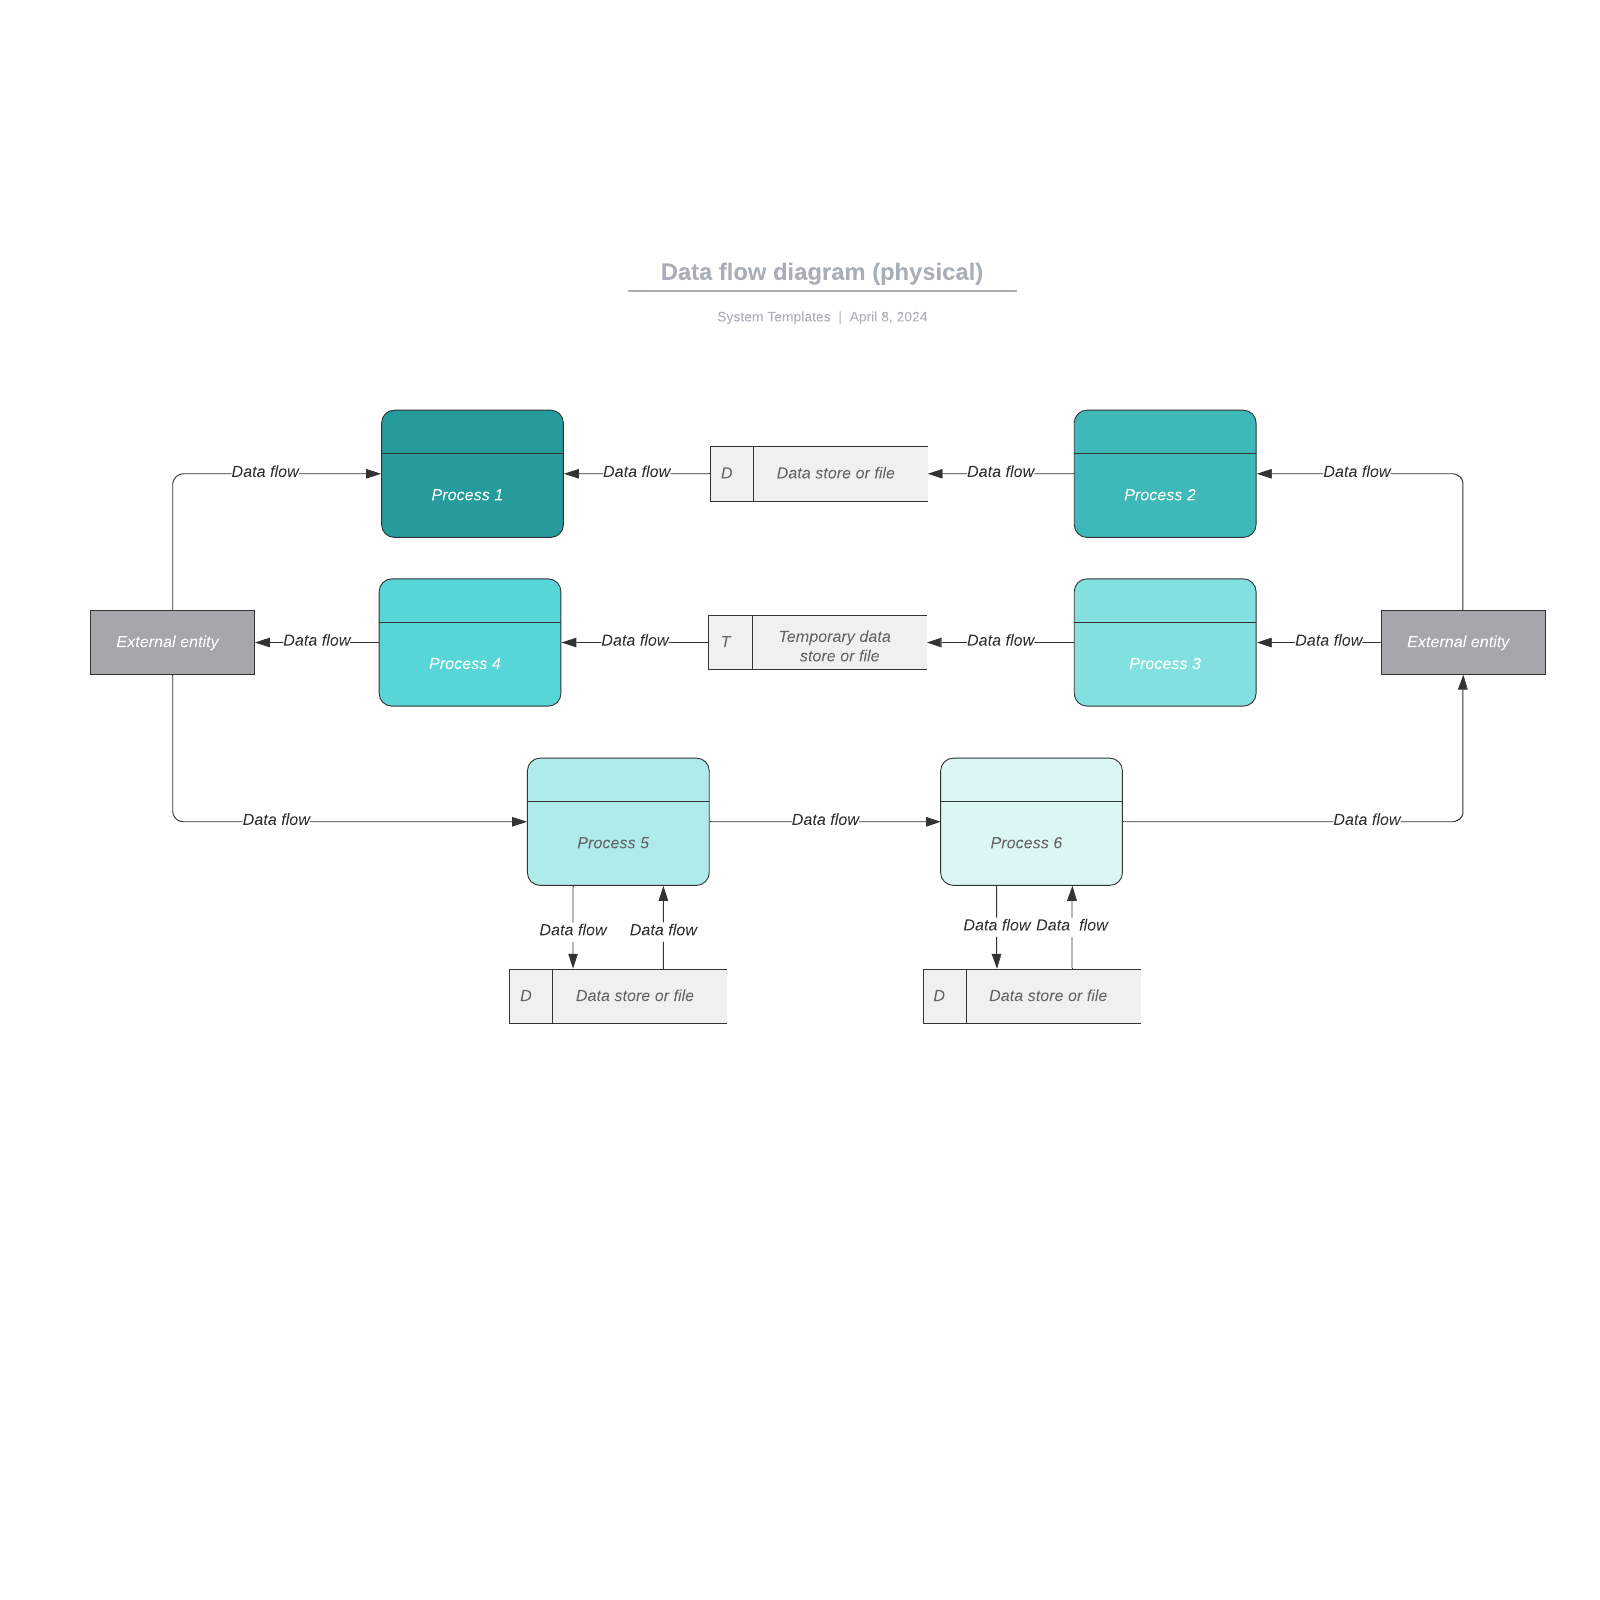 Data flow diagram (physical) example